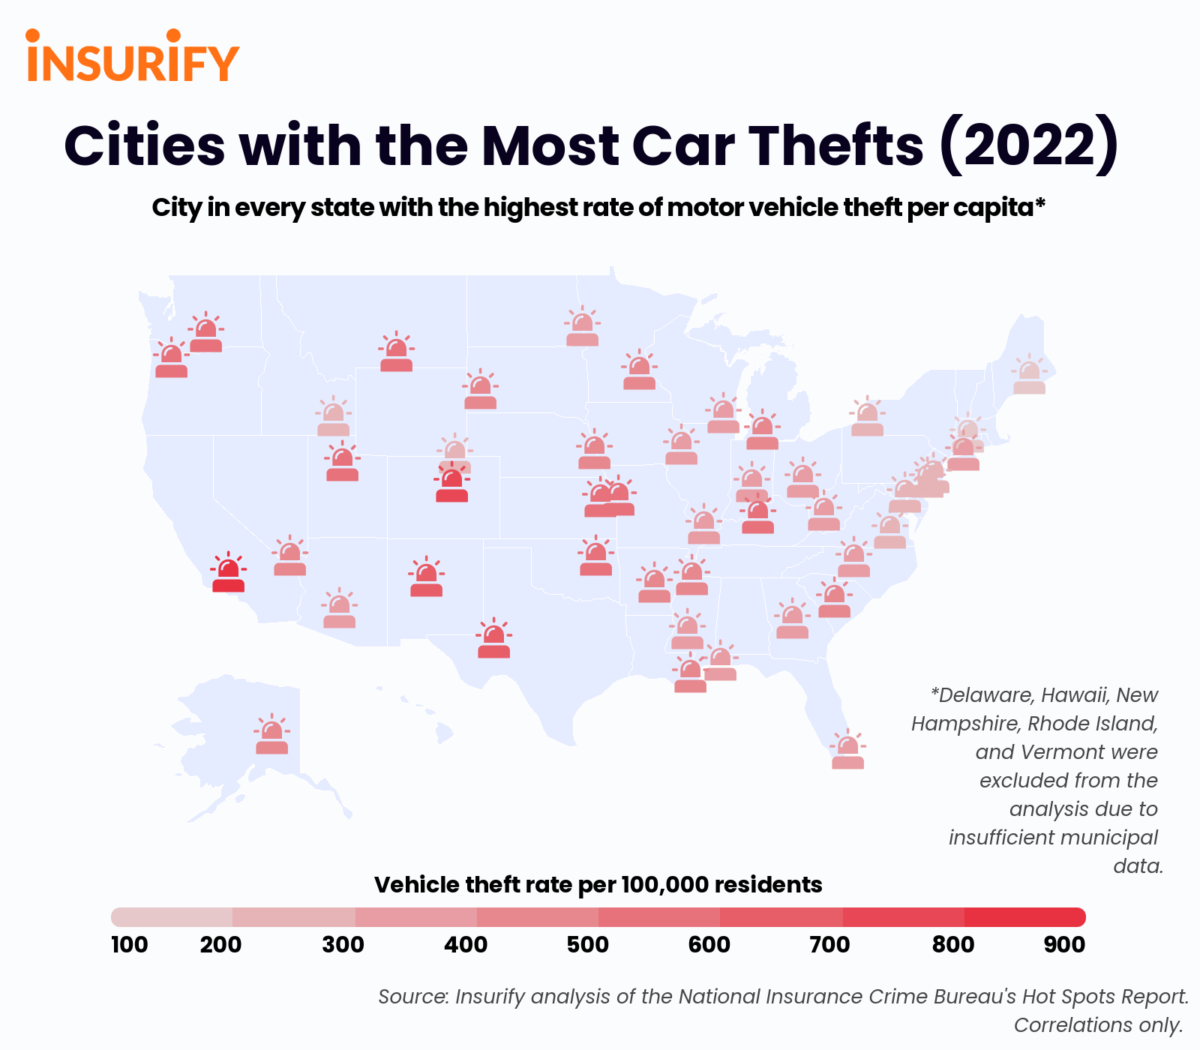 Icon map showing the city in each state with the highest rate of car theft.